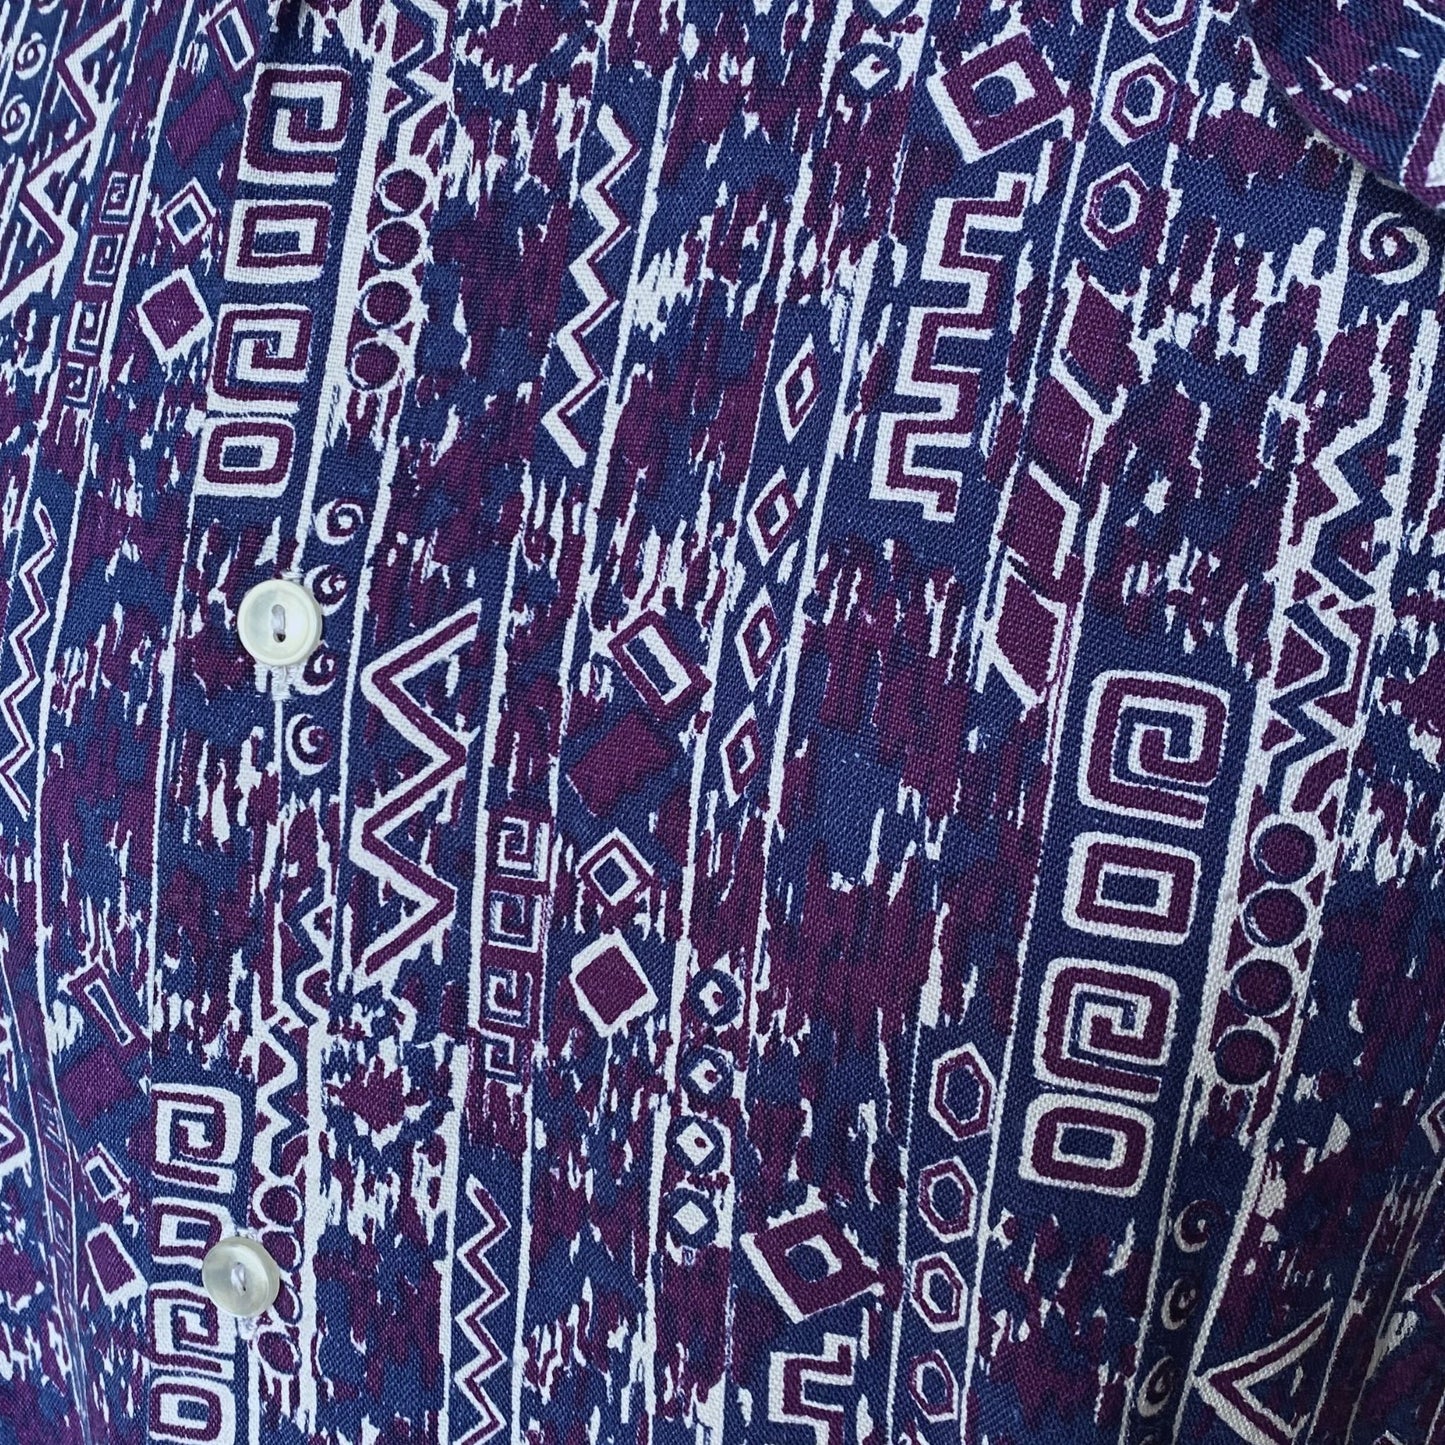 Vintage 1970s Blue, Purple and White Cotton Abstract Print Dagger Collar Shirt. Approx UK size XL to XXL (men) 20-24 ( women)